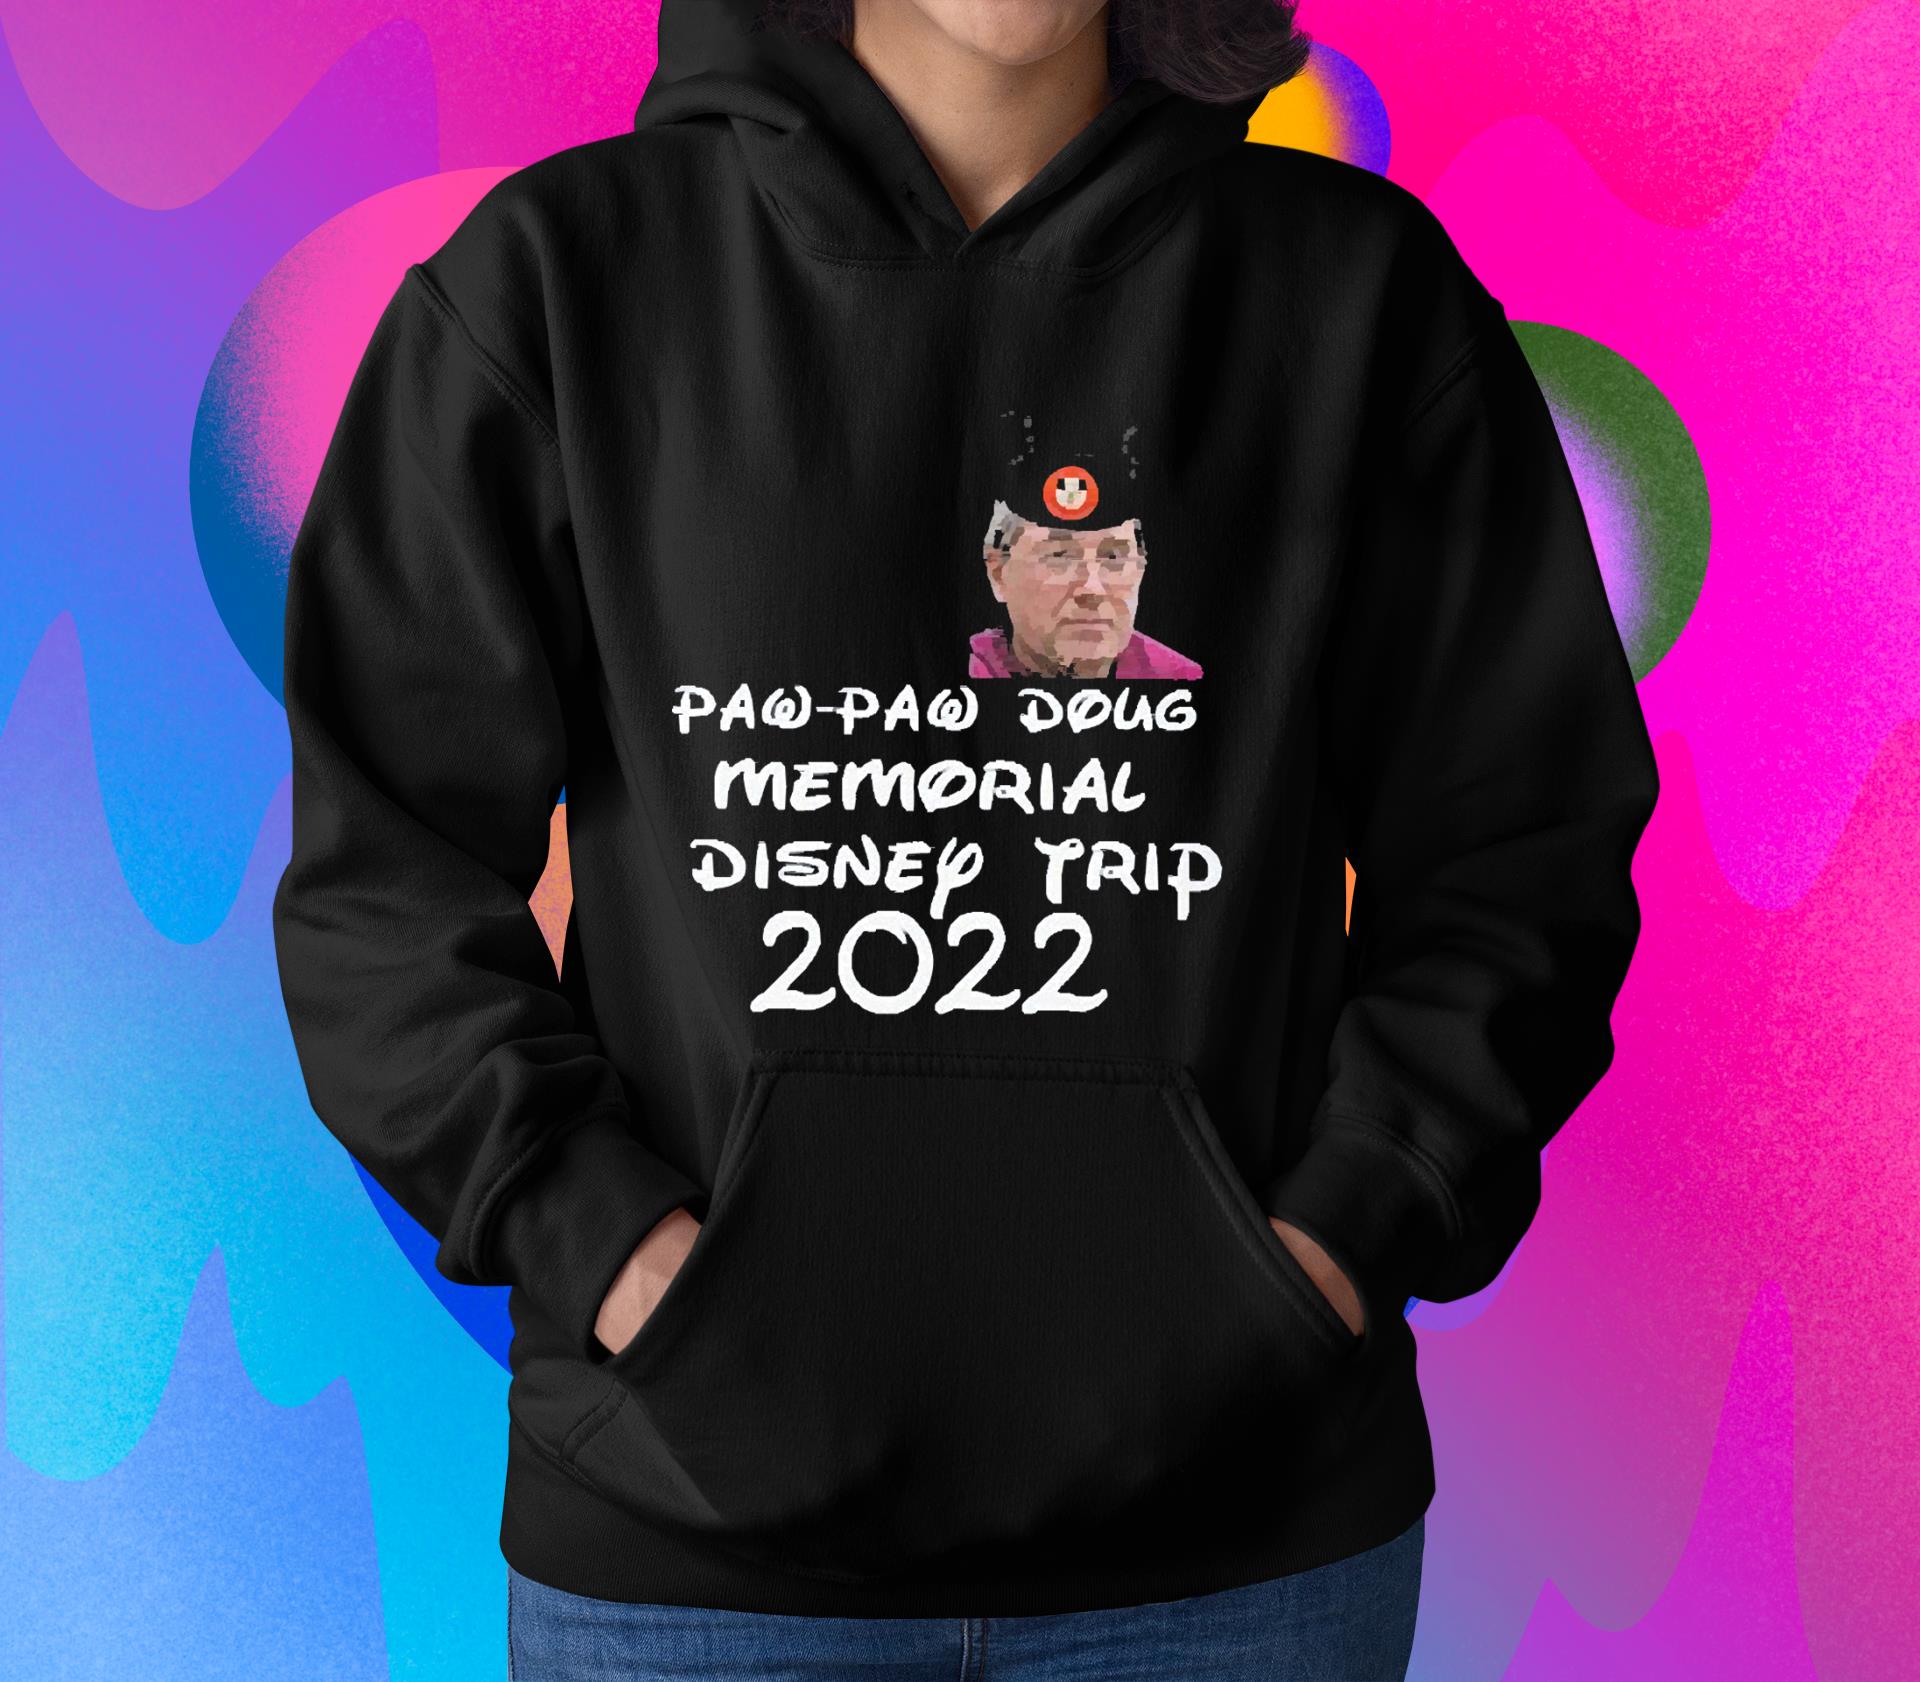 Justin Mcelroy I Would Have This Paw Paw Doug Memorial Disney Trip 2022 Shirt